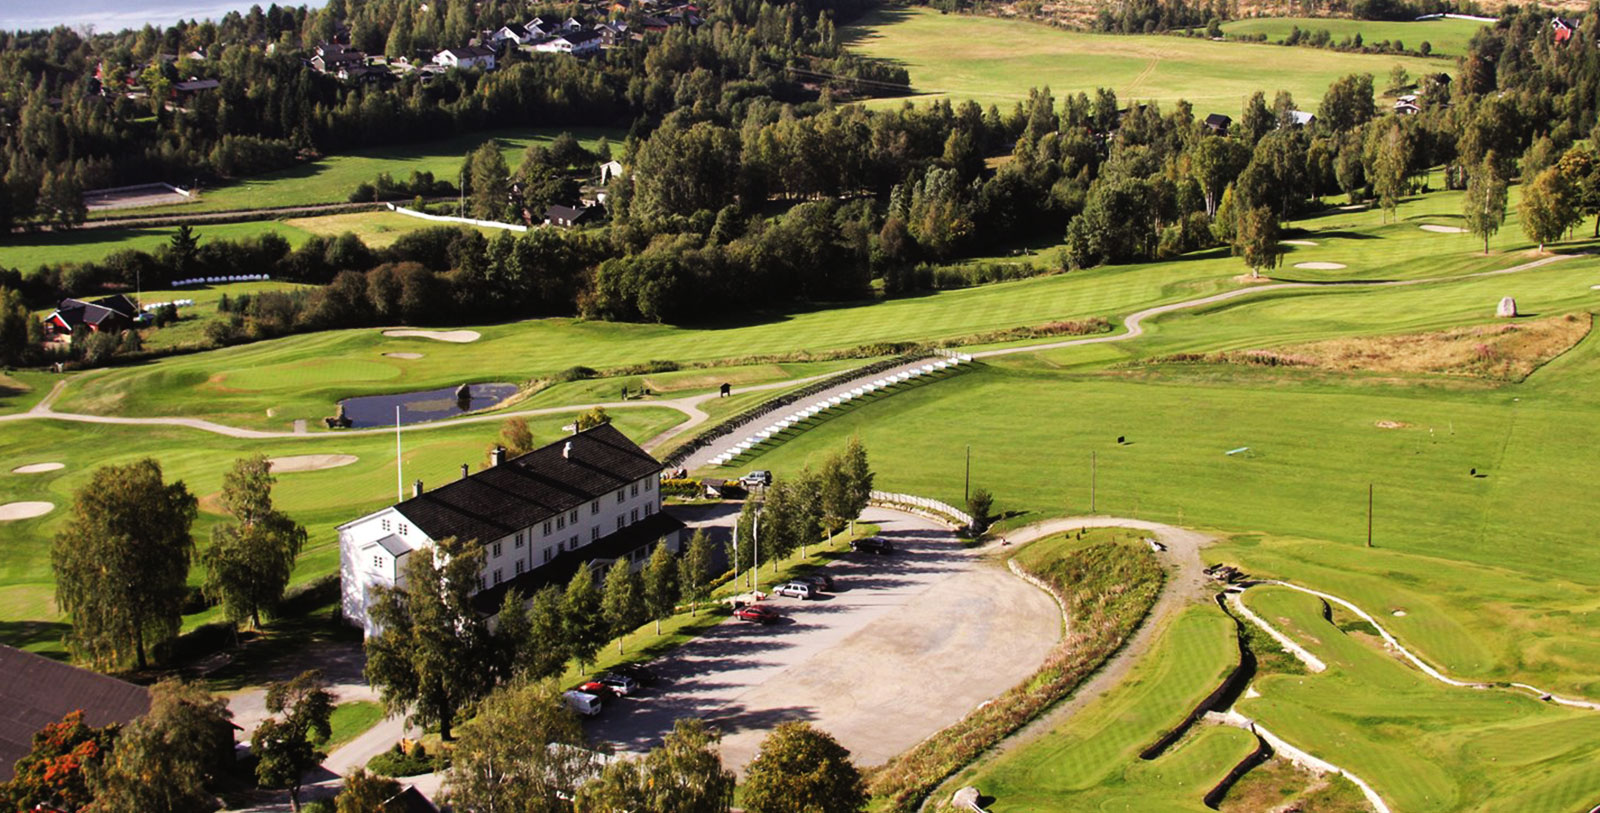 Image of Hotel Exterior, Nermo Hotell & Apartments, 1442, Member of Historic Hotels Worldwide, in Oyer, Norway, Discover